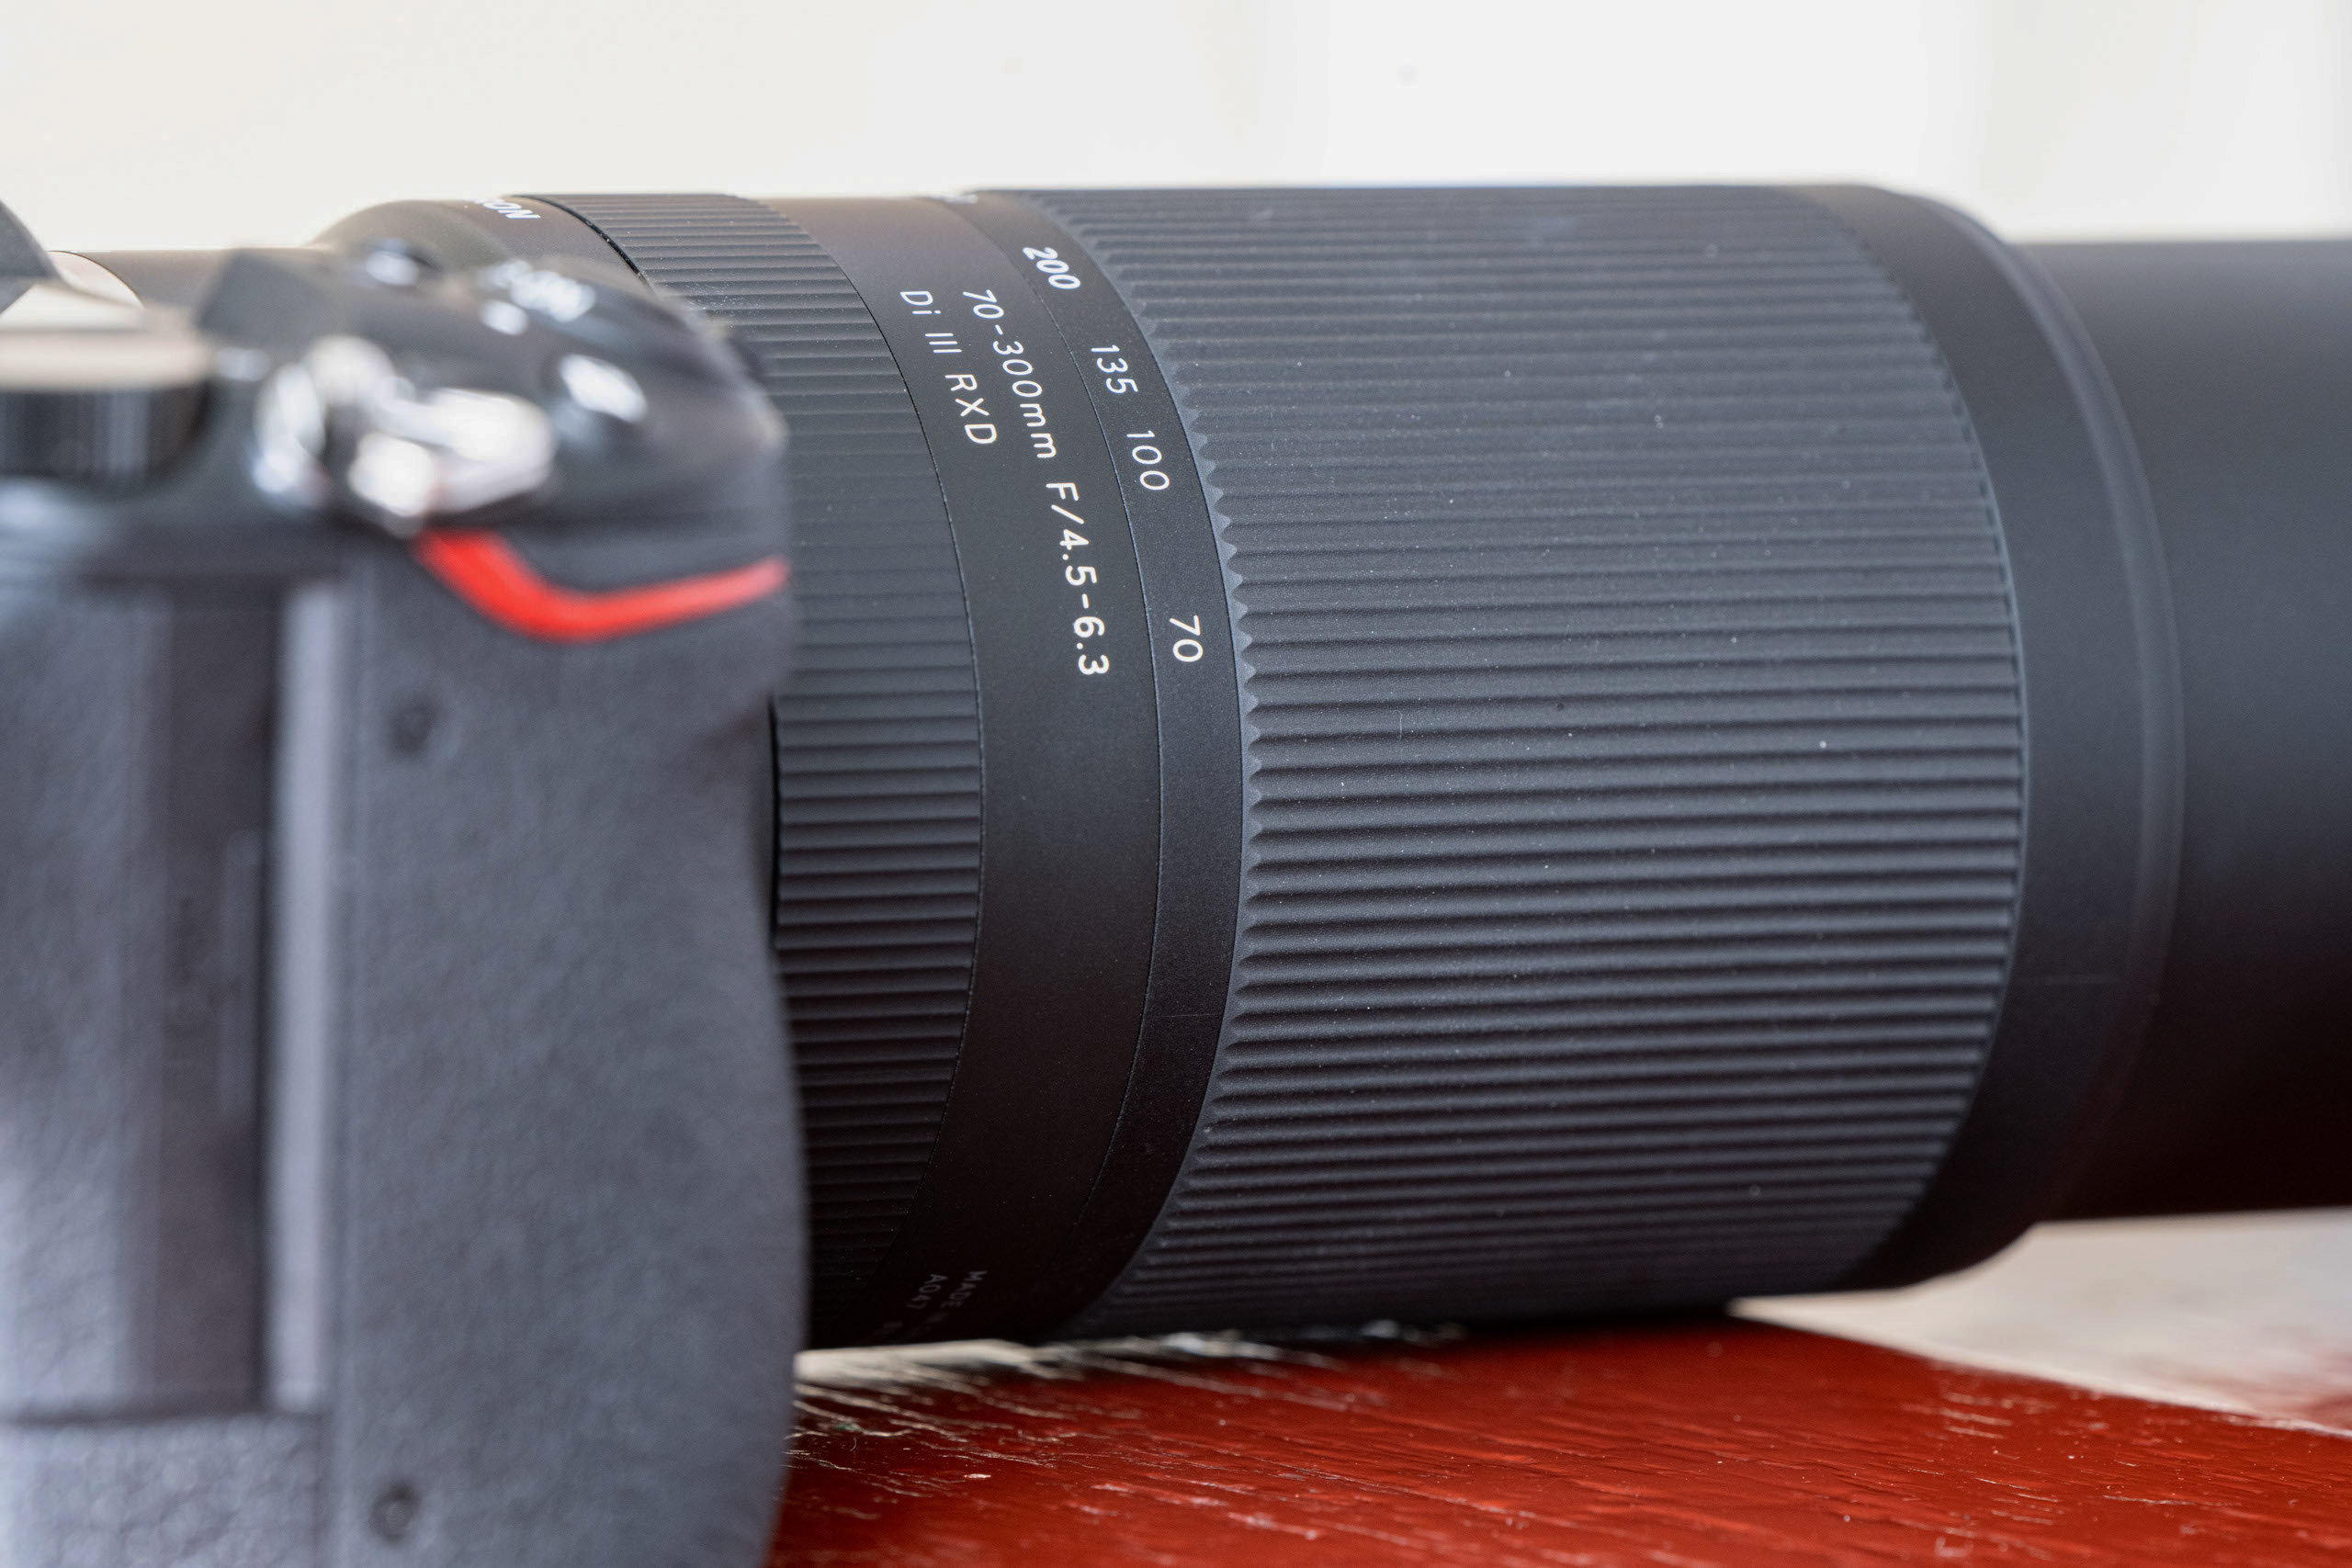 Tamron 70-300mm F/4.5-6.3 Di III RXD (Model A047) Review